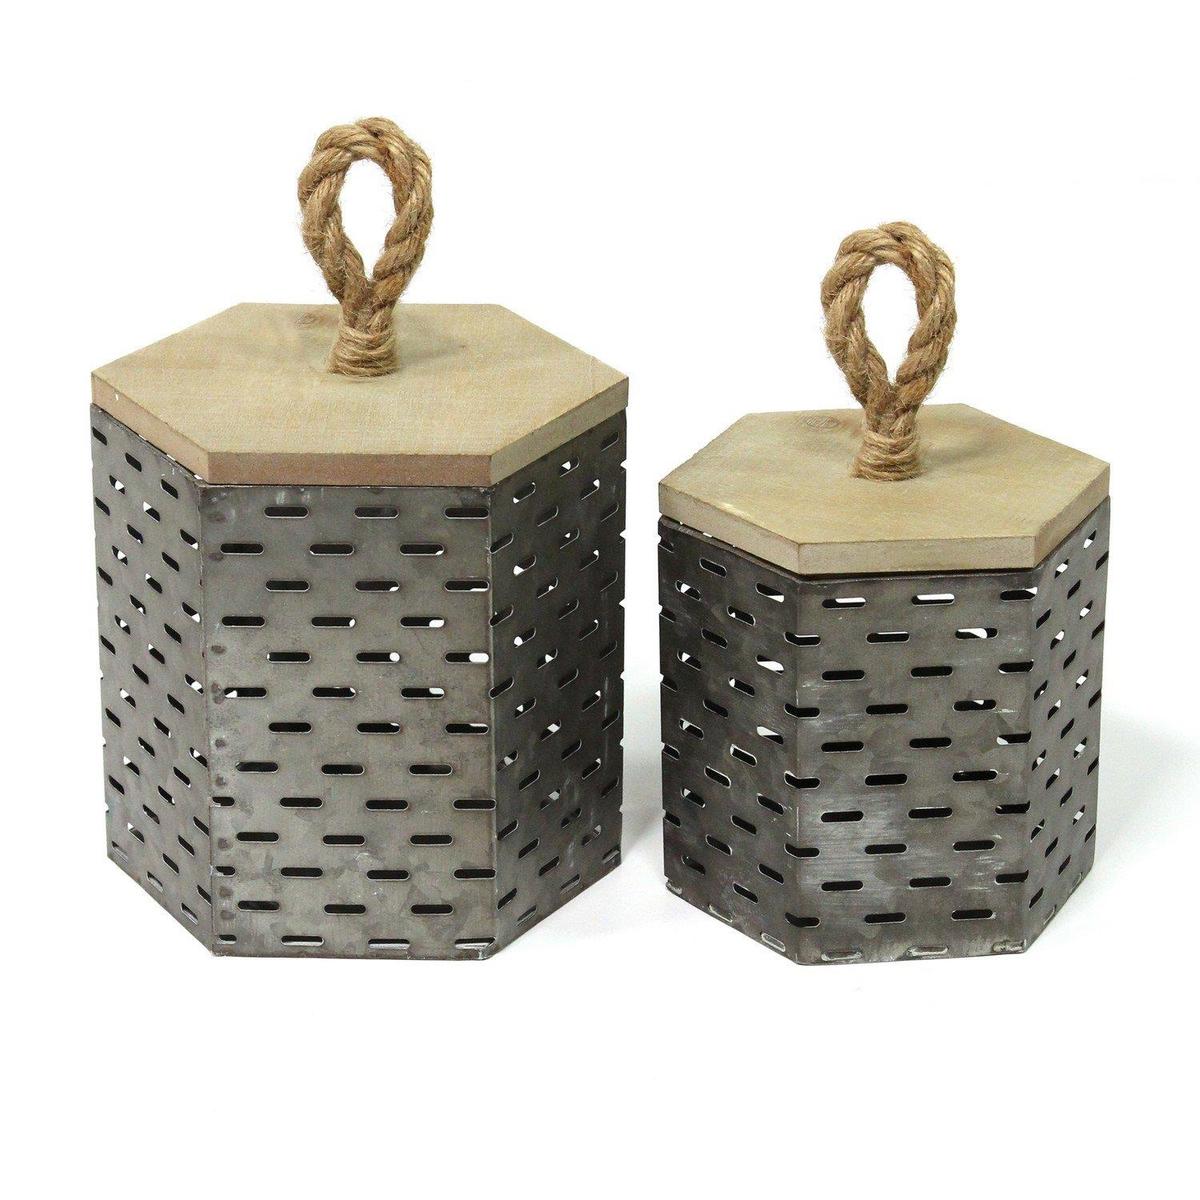 Stratton Home Decor Set Of 2 Metal Decorative Containers S19349